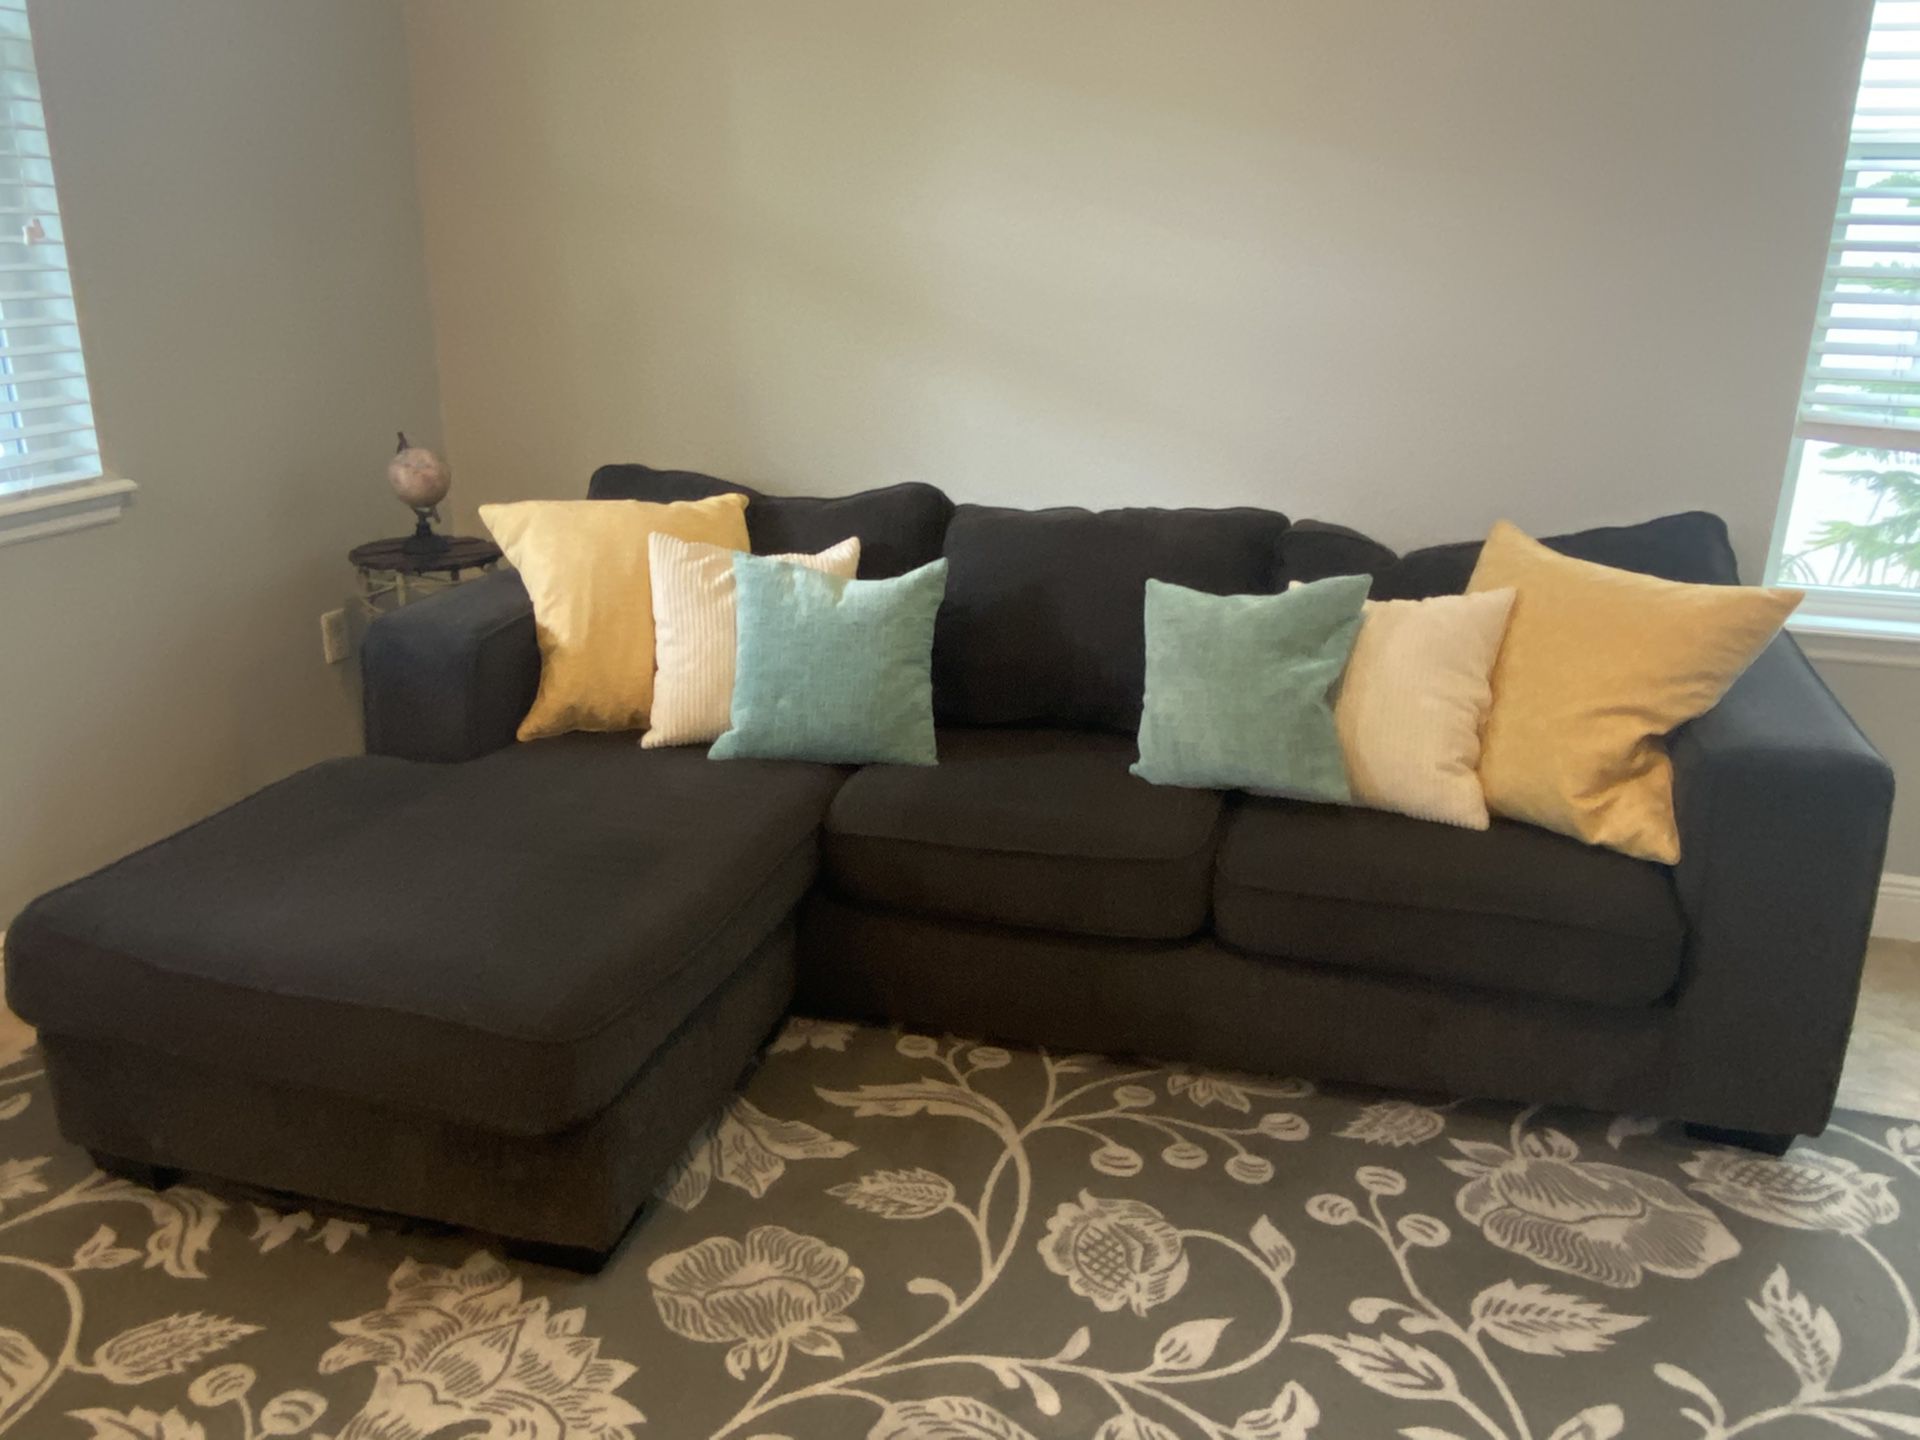 3 seat charcoal grey sectional couch